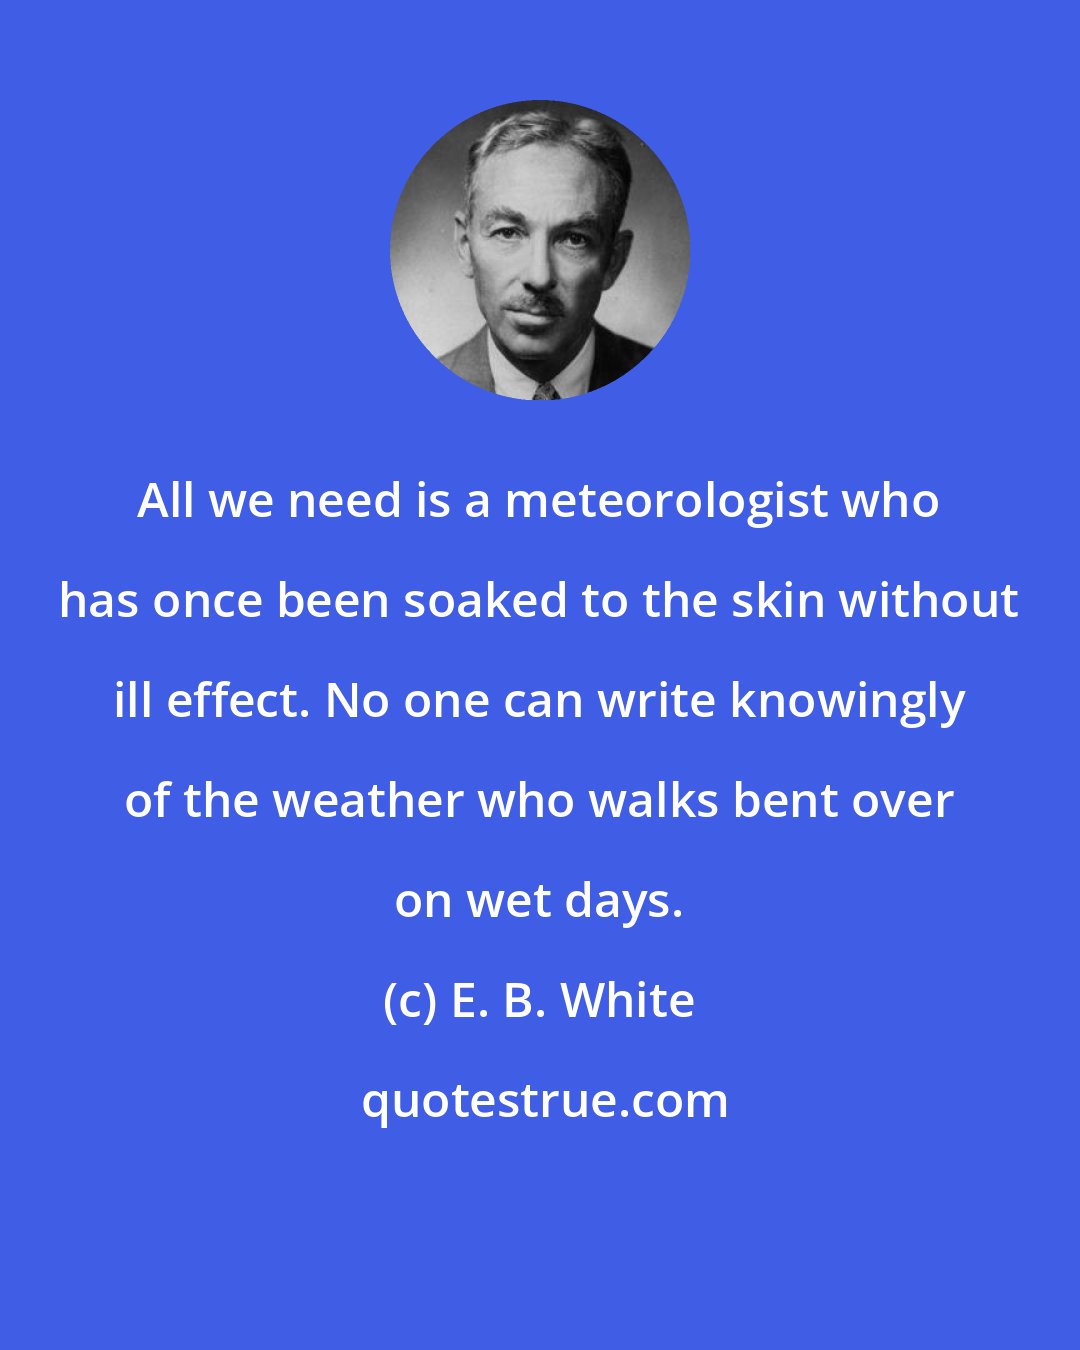 E. B. White: All we need is a meteorologist who has once been soaked to the skin without ill effect. No one can write knowingly of the weather who walks bent over on wet days.